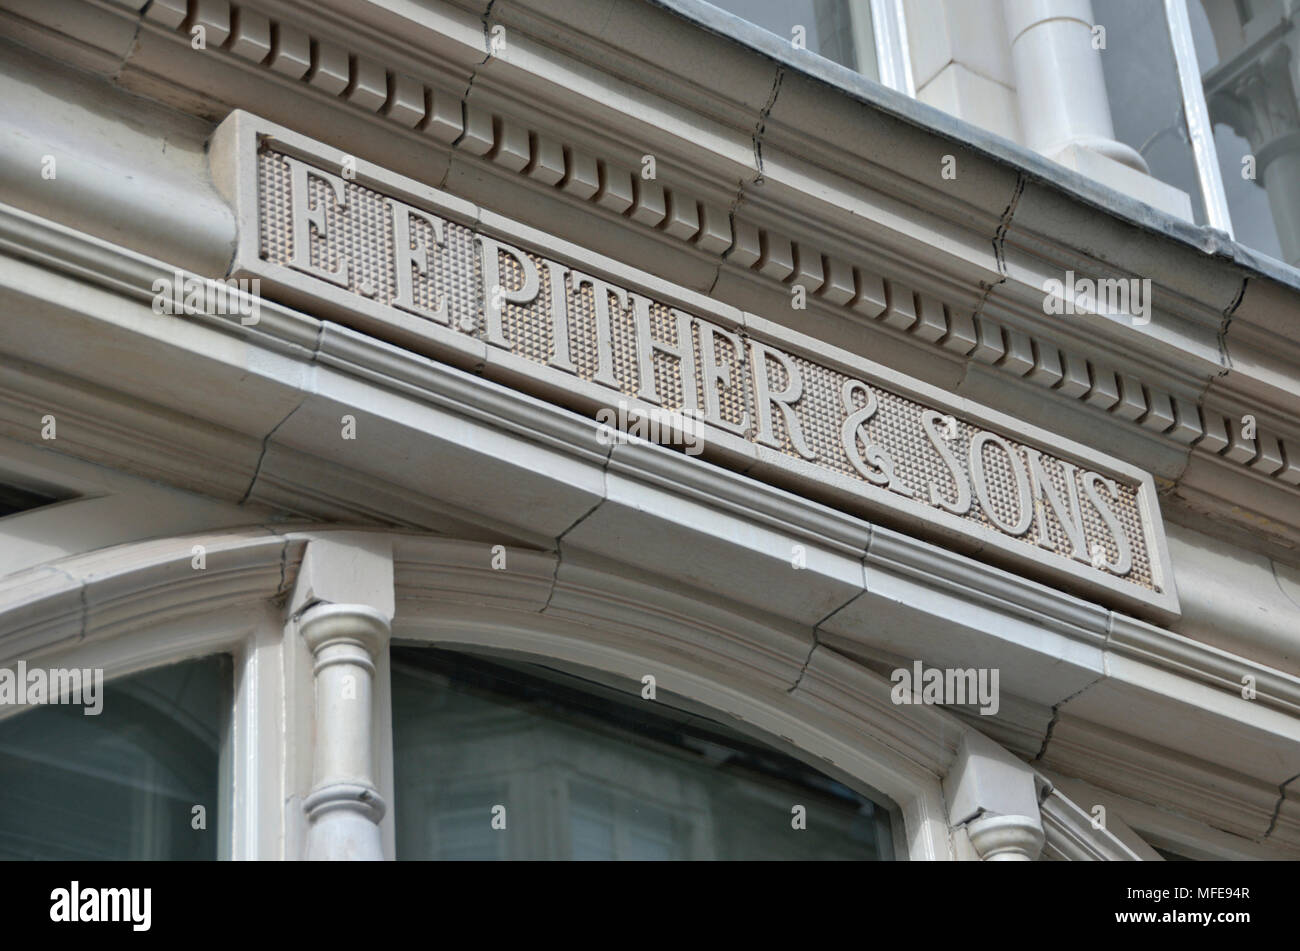 E E Pther and Sons carved stone sign, Radiant House, Mortimer Street, Fitzrovia, London, UK. Stock Photo